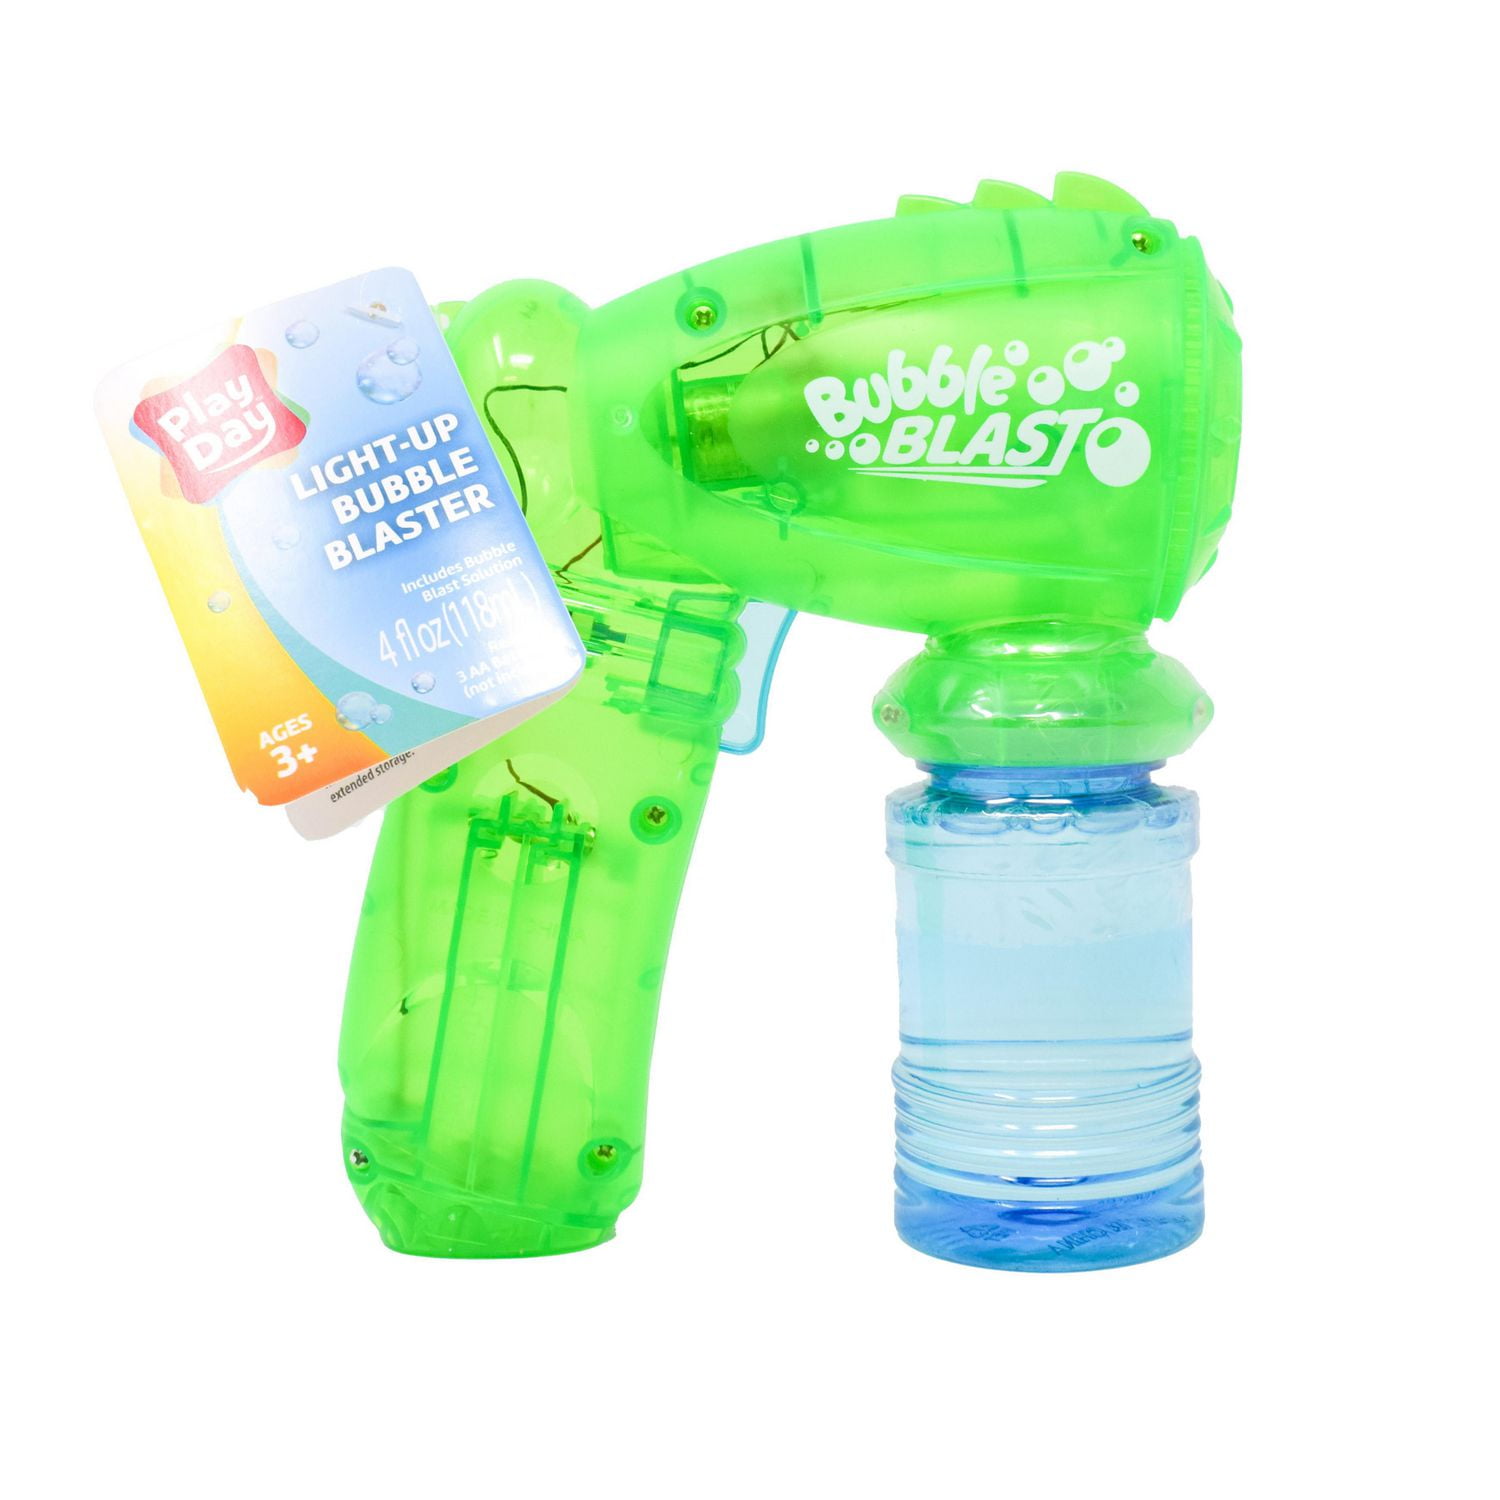 Play Day Light Up Bubble Blaster with 4oz Bubble Solution